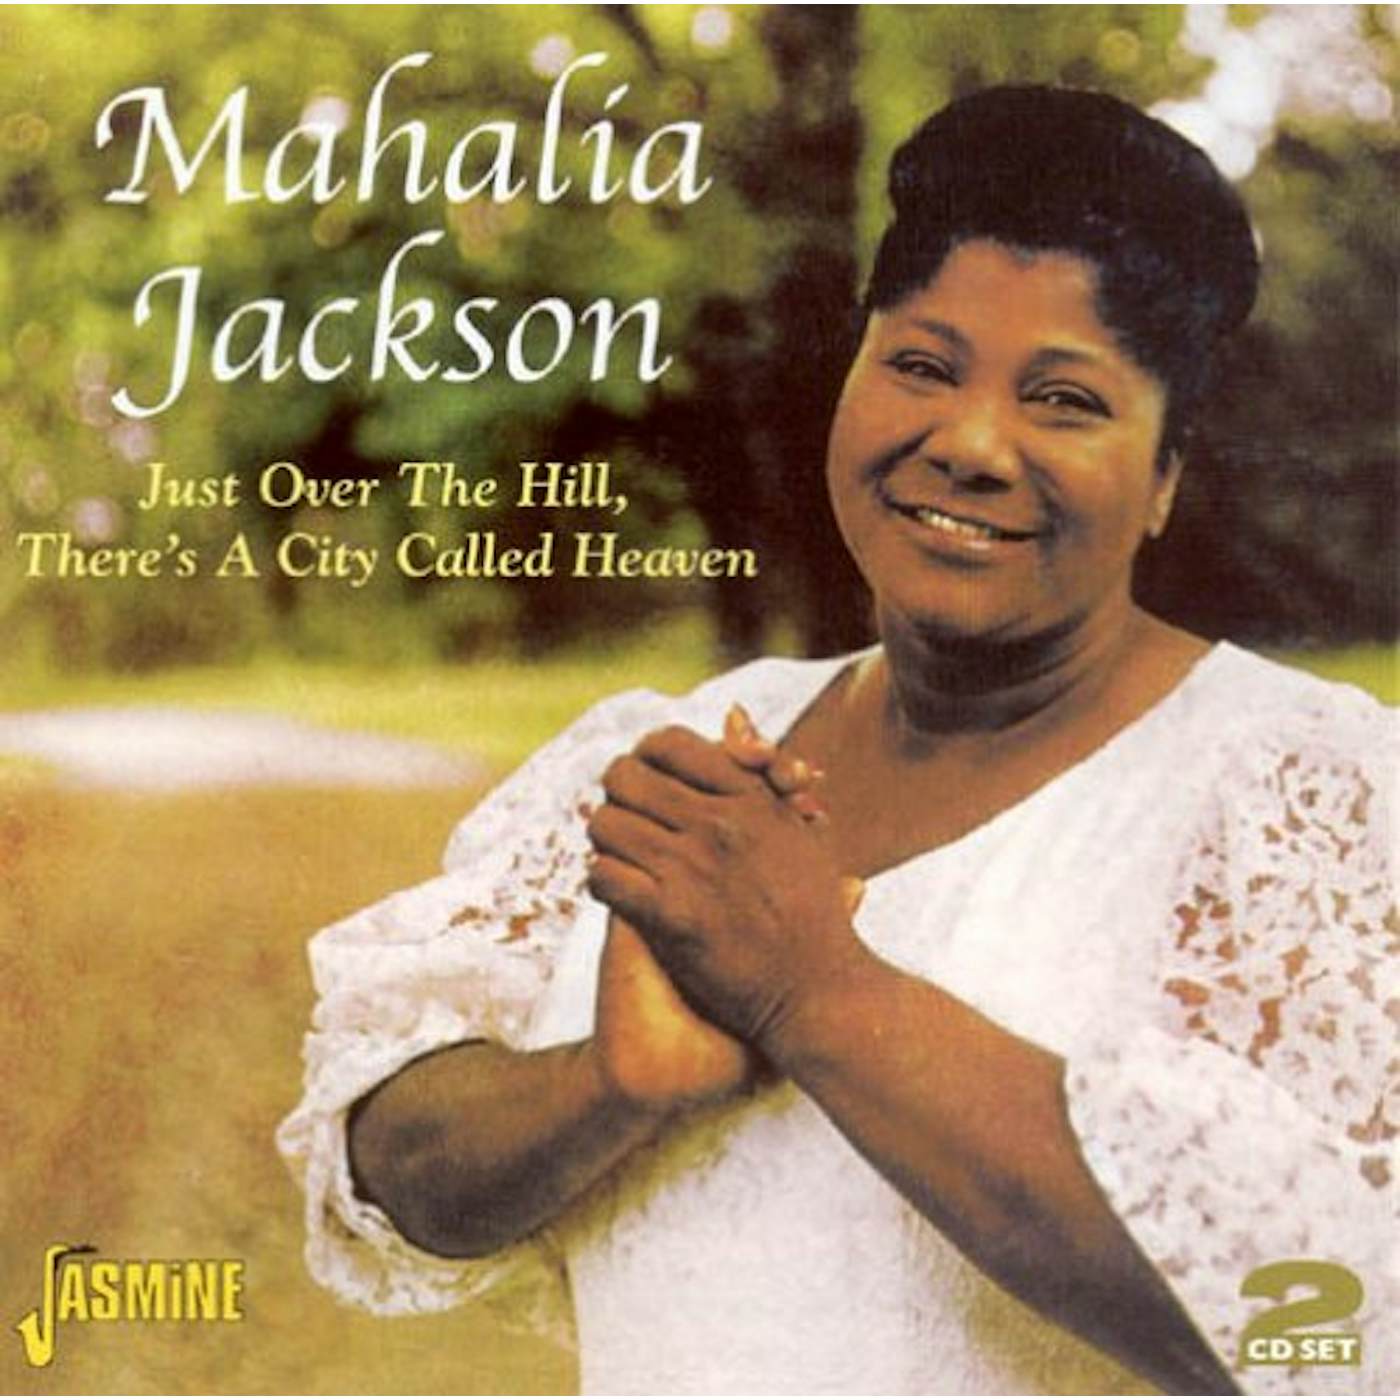 Mahalia Jackson JUST OVER THE HILL THERE'S A CITY CALLED HEAVEN CD